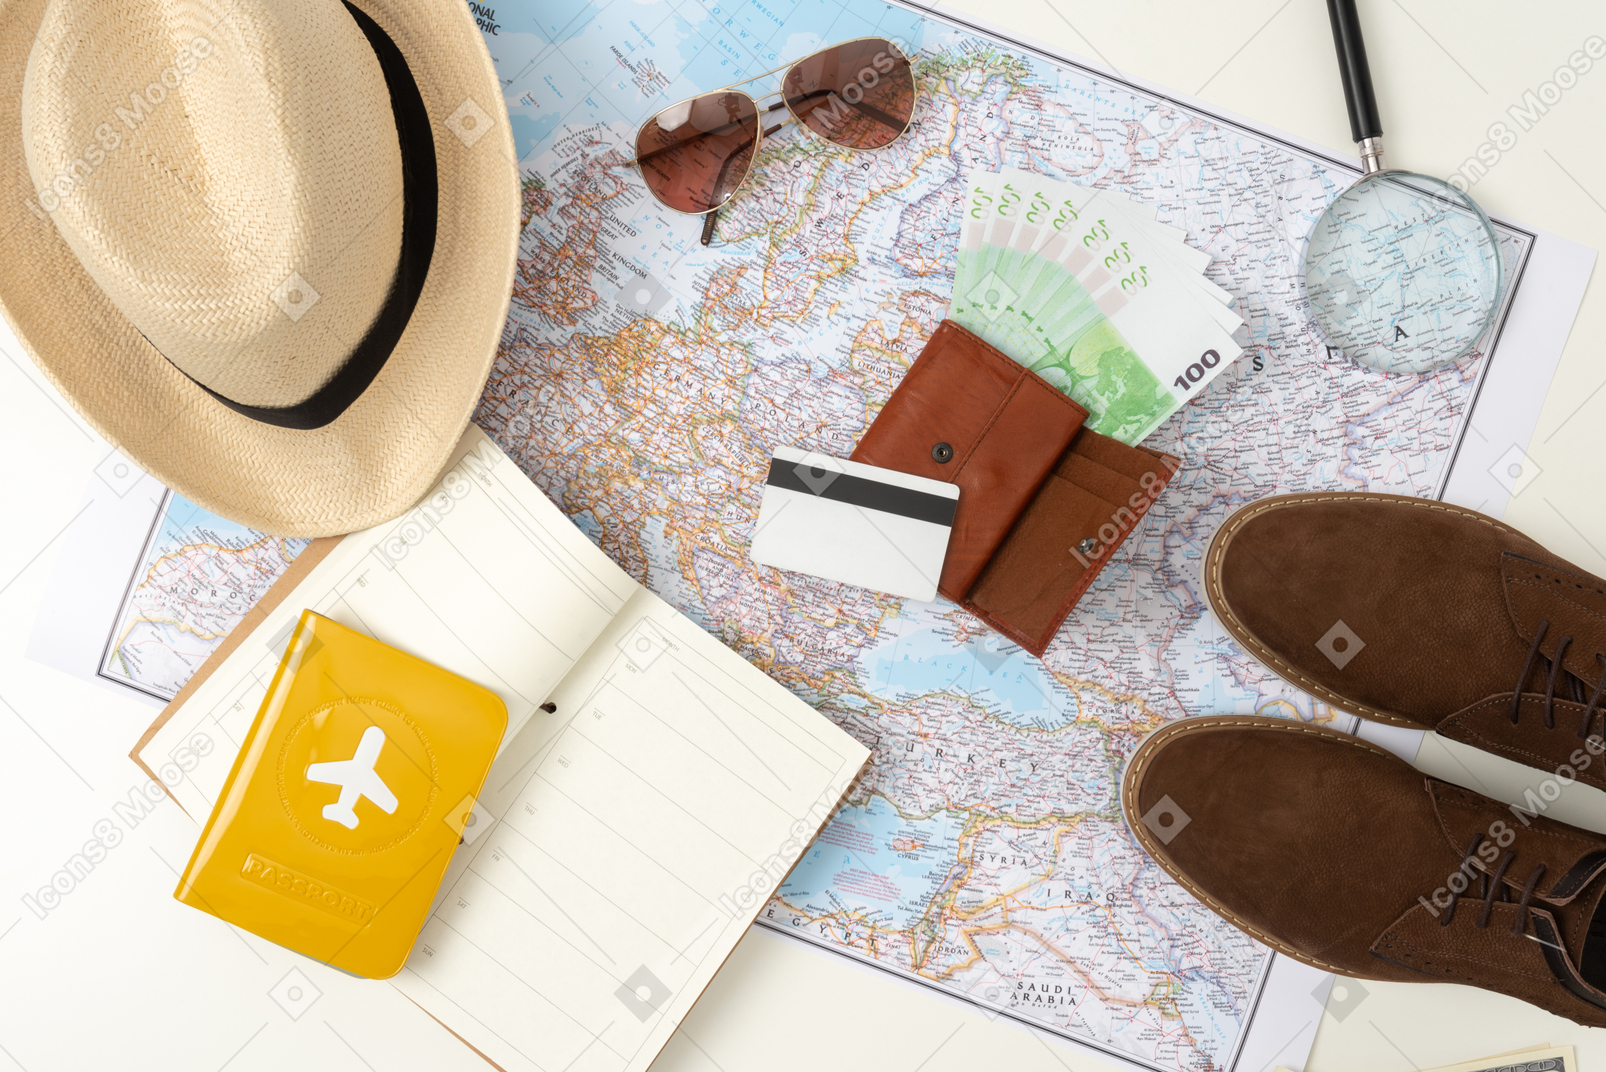 Sunglasses, straw hat, boots, international passport and a map with a tourist route lying around the only thing that can replace them all: money